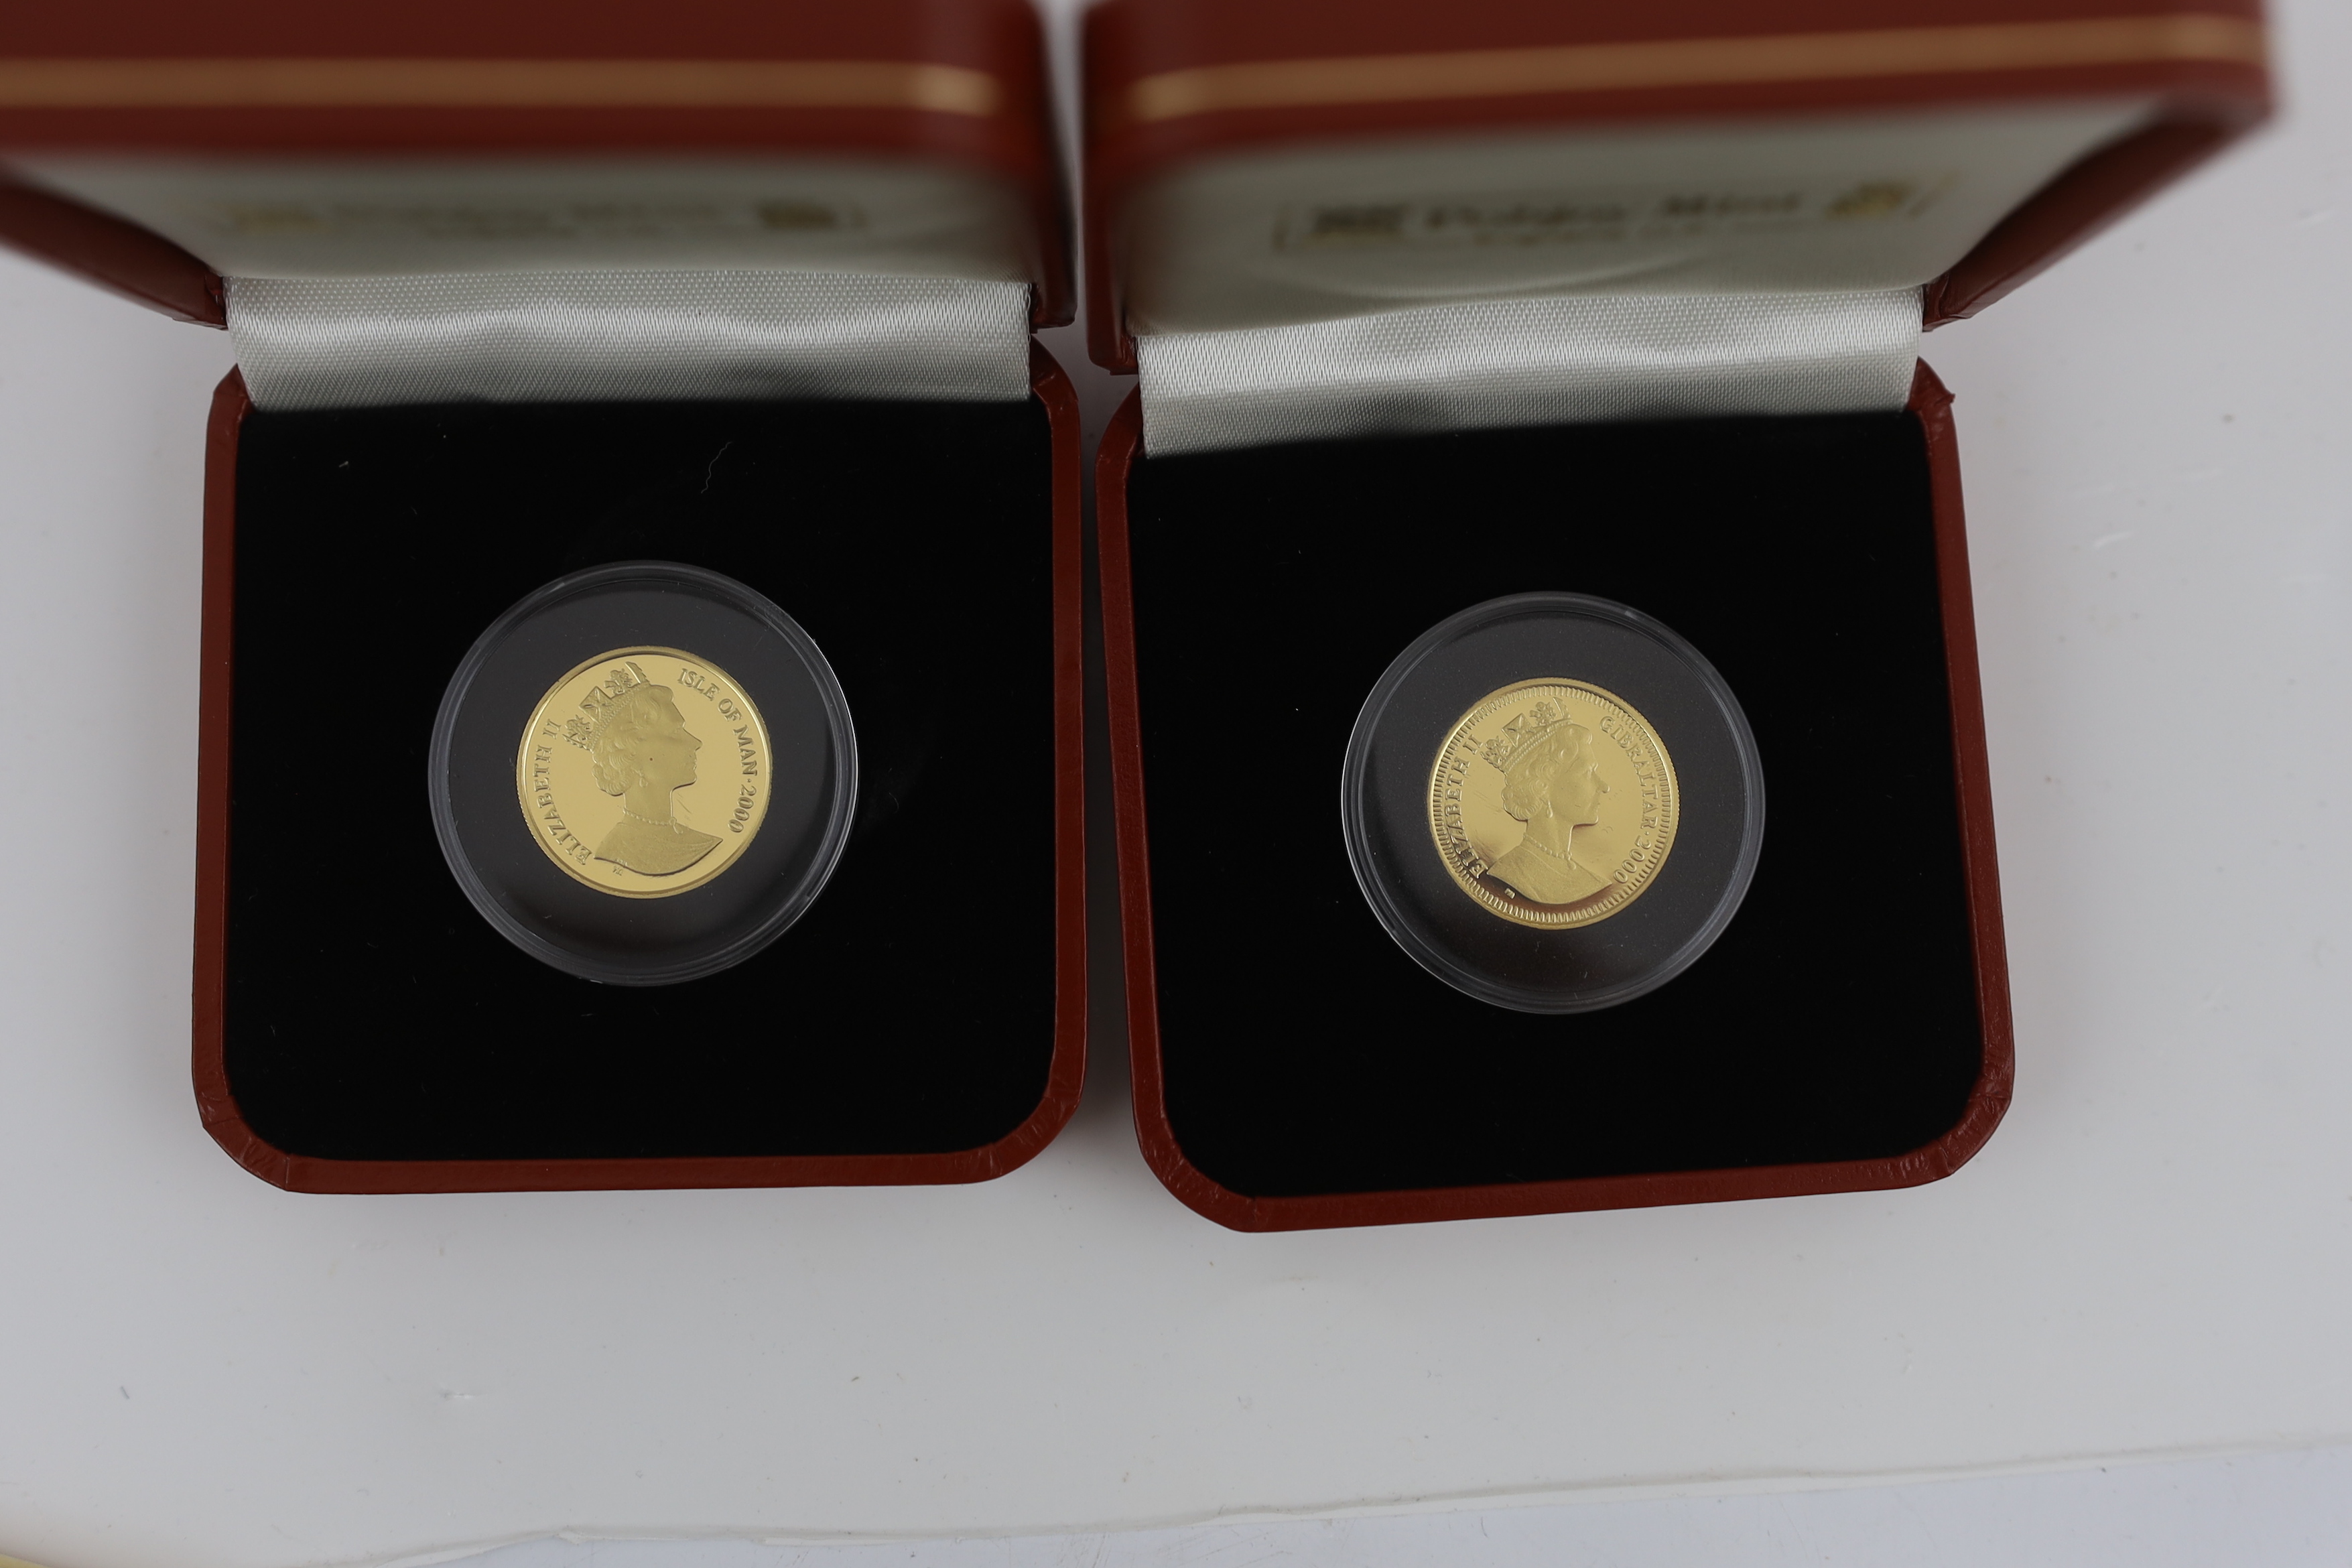 Gold coins - Two Pobjoy mint Isle of Man proof gold 1/5 crown coins, each 6.22g, 999.9/1000 purity - Image 4 of 5